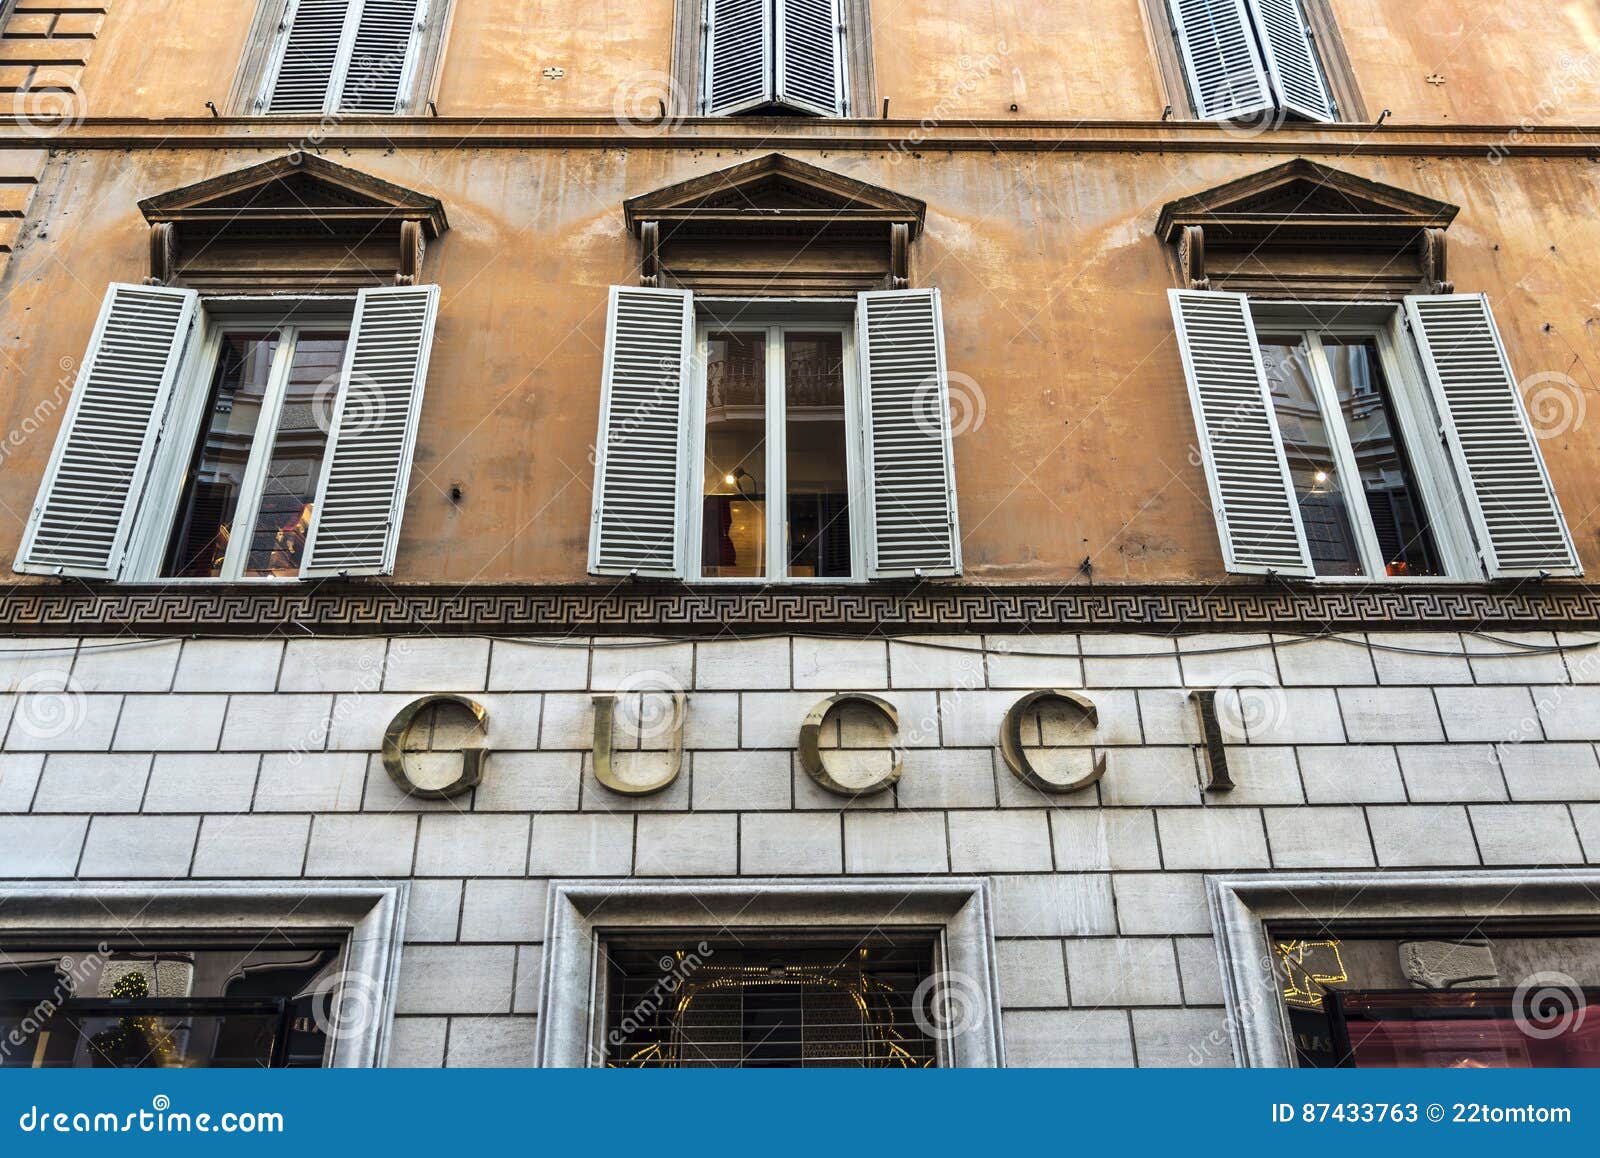 Gucci shop in Rome, Italy editorial stock photo. Image of design - 87433763